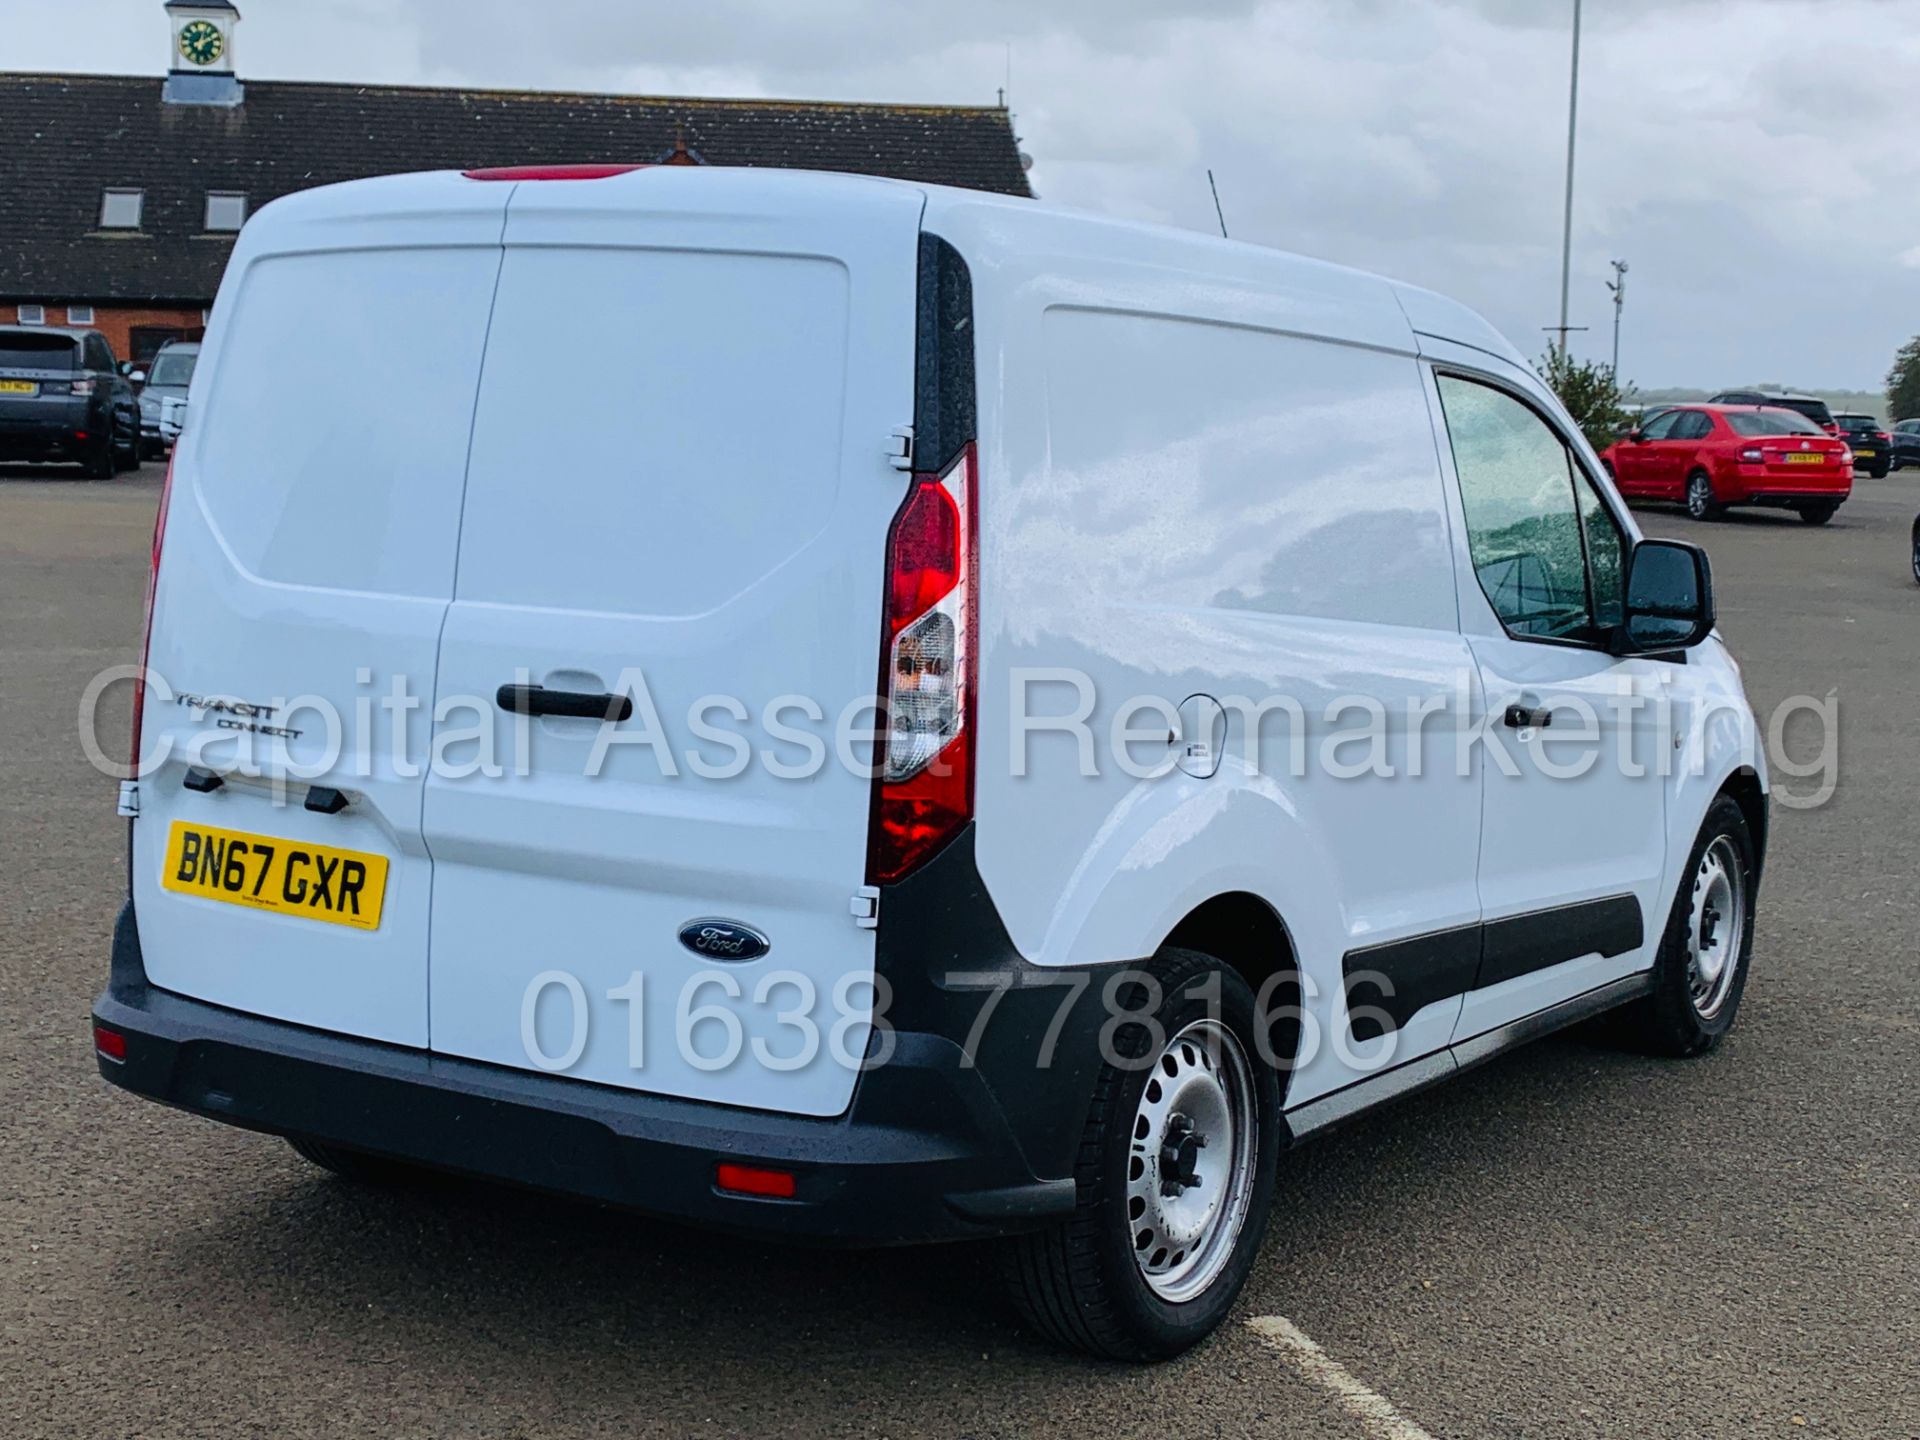 (On Sale) FORD TRANSIT CONNECT 75 T200 *SWB* (67 REG) '1.5 TDCI - EURO 6 COMPLIANT' (1 OWNER) - Image 7 of 36